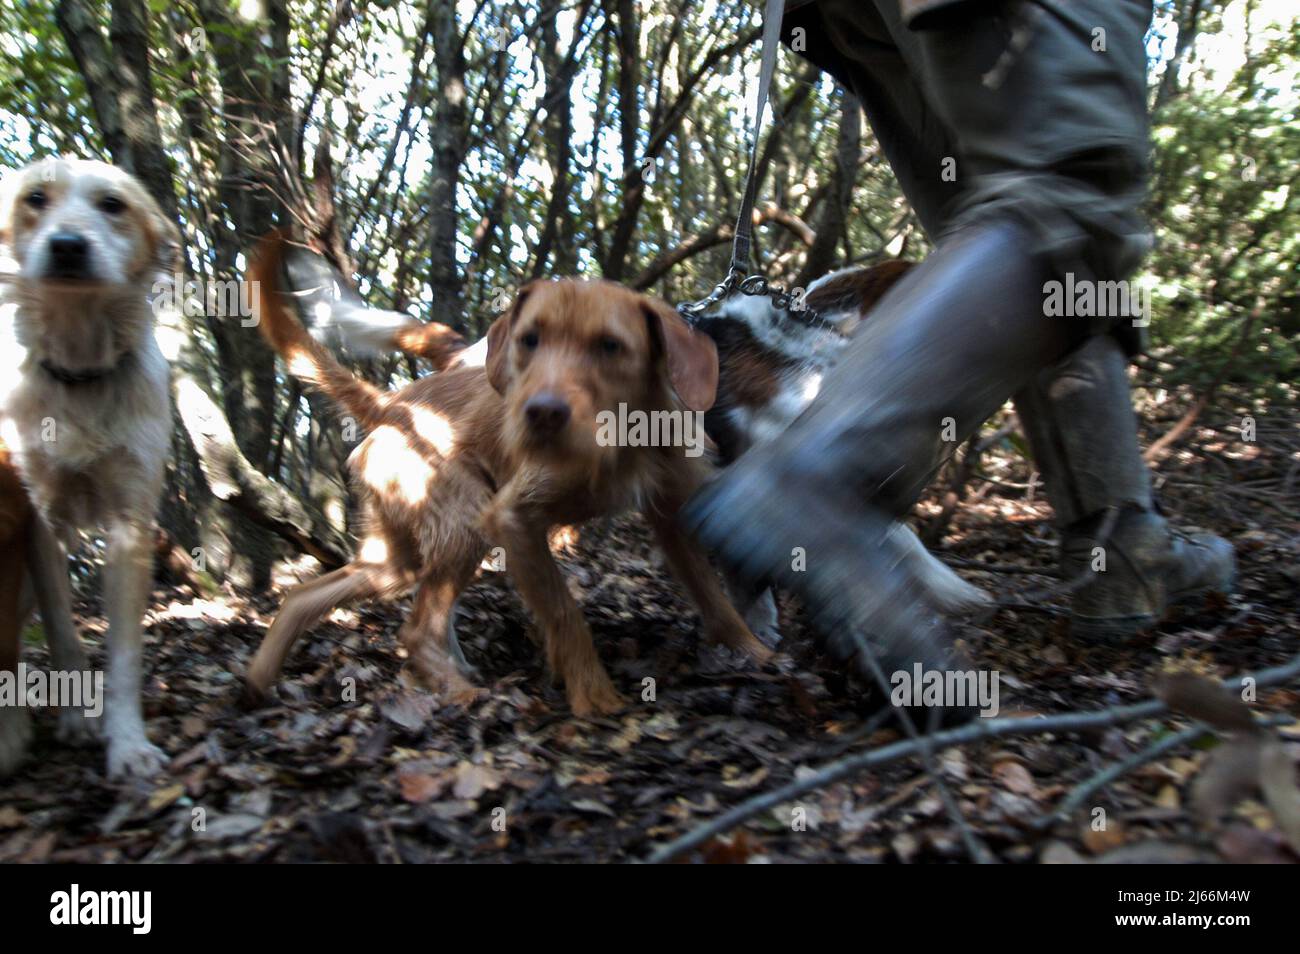 Page 2 - Boar Hunters High Resolution Stock Photography and Images - Alamy